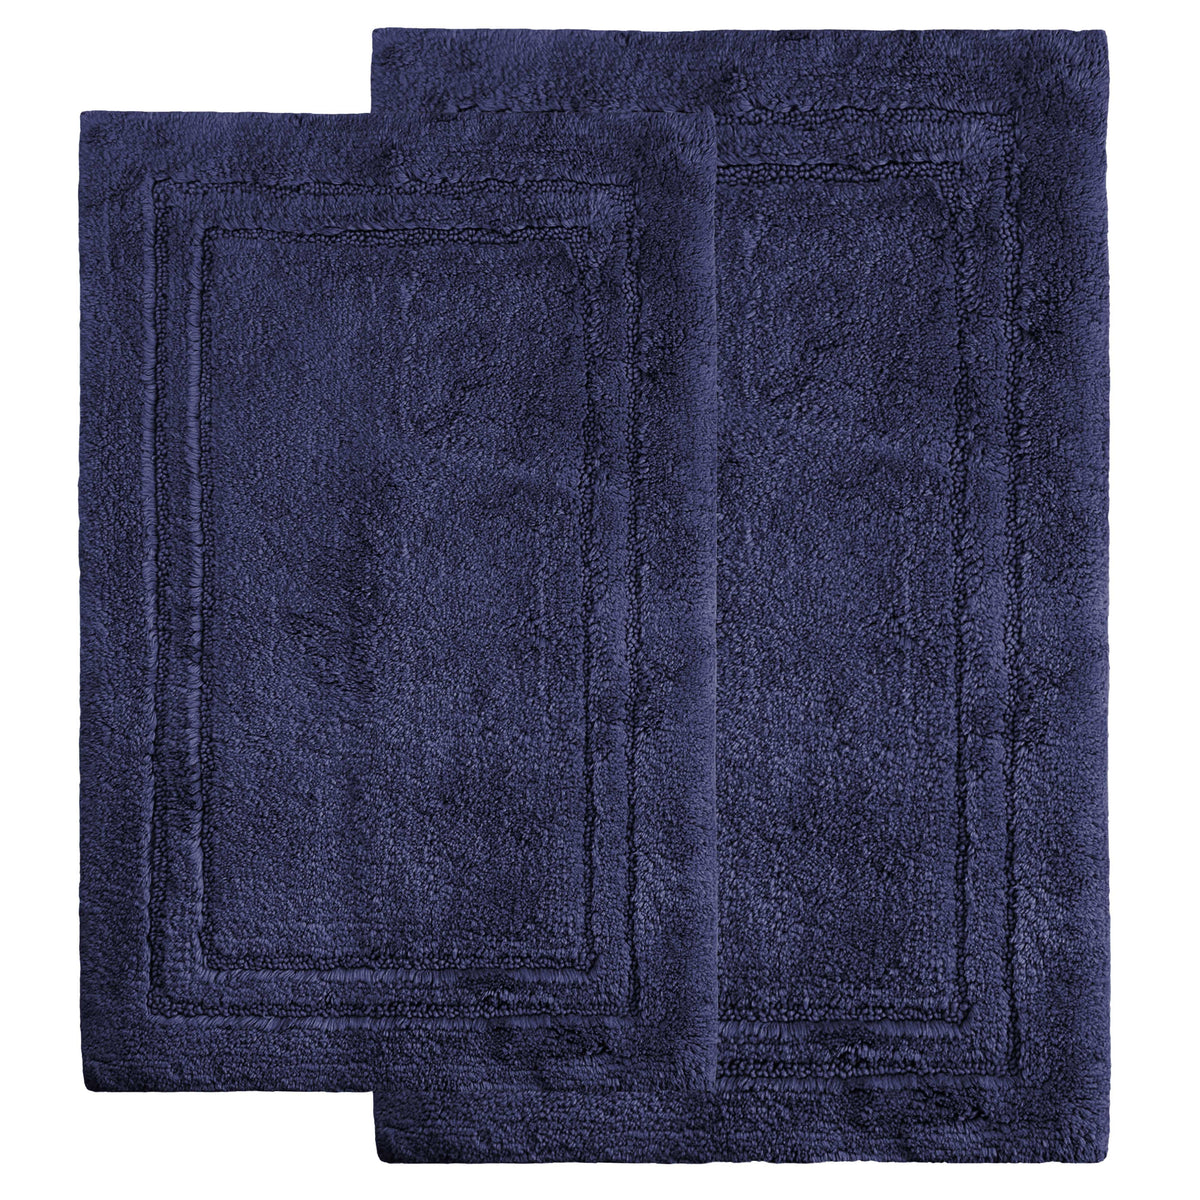 Non-Slip Absorbent Assorted Solid 2 Piece Bath Rug Set - NavyBlue